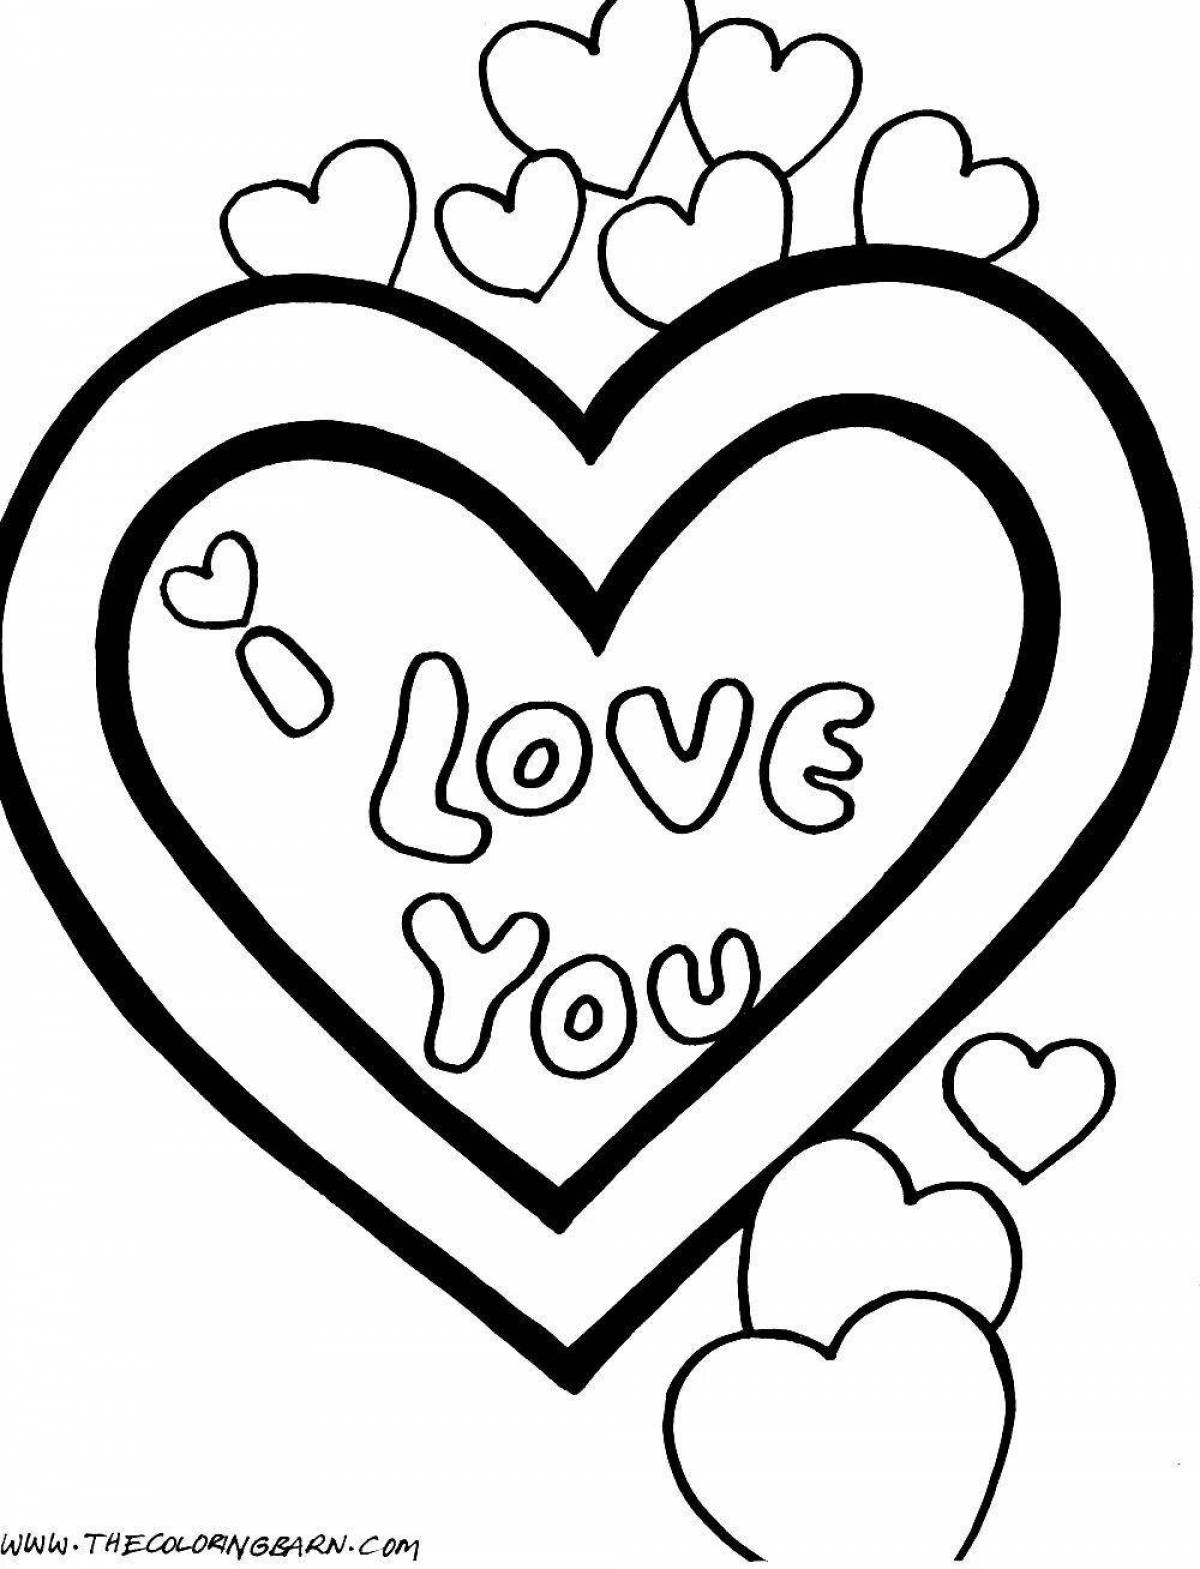 Playful i love you dad coloring page